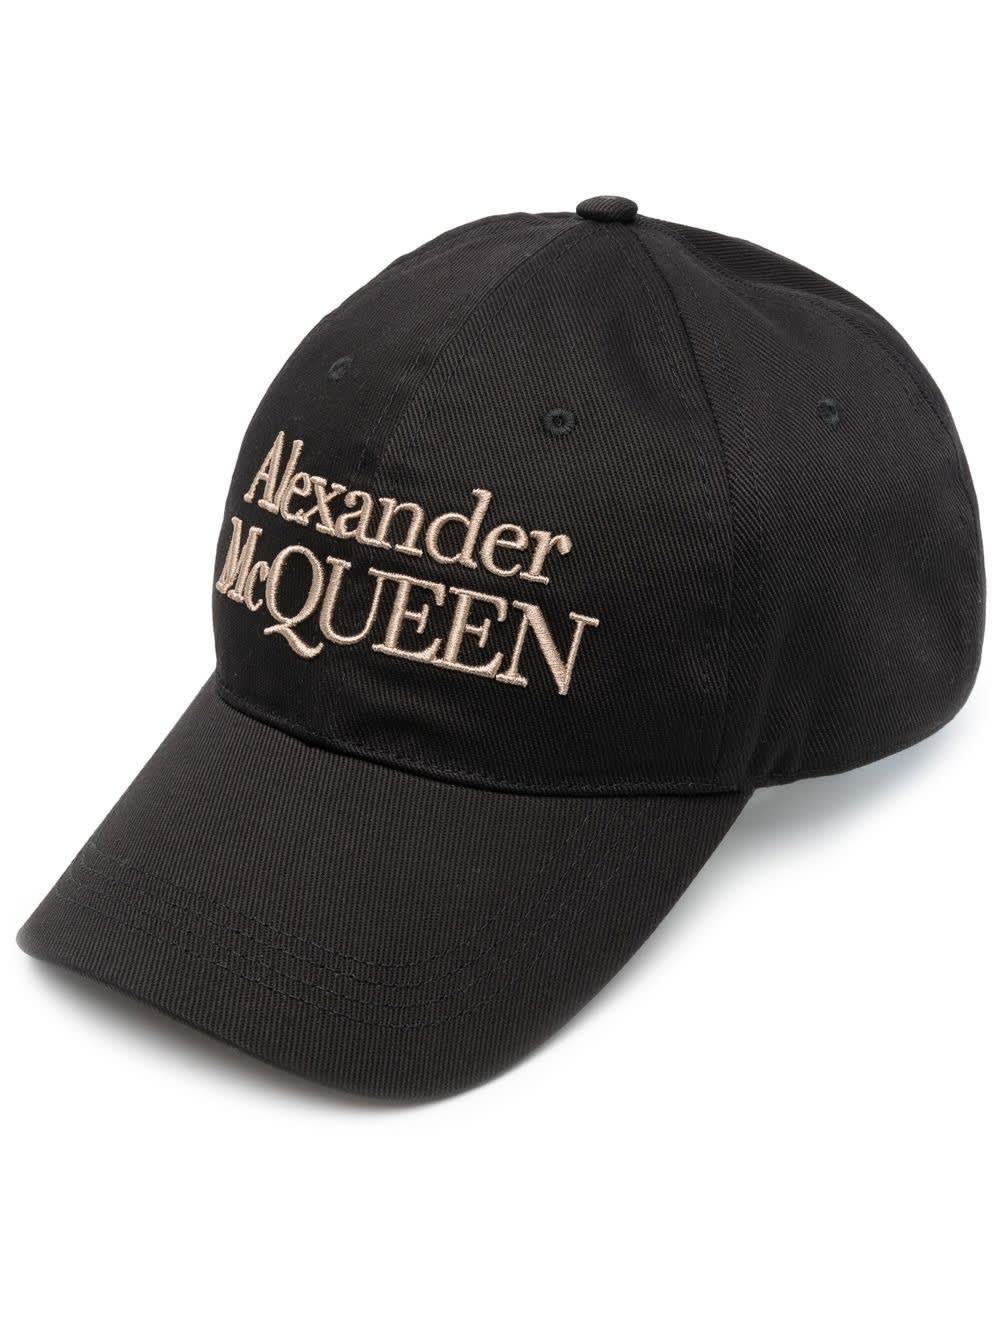 ALEXANDER MCQUEEN BLACK BASEBALL HAT WITH EMBROIDERED LOGO